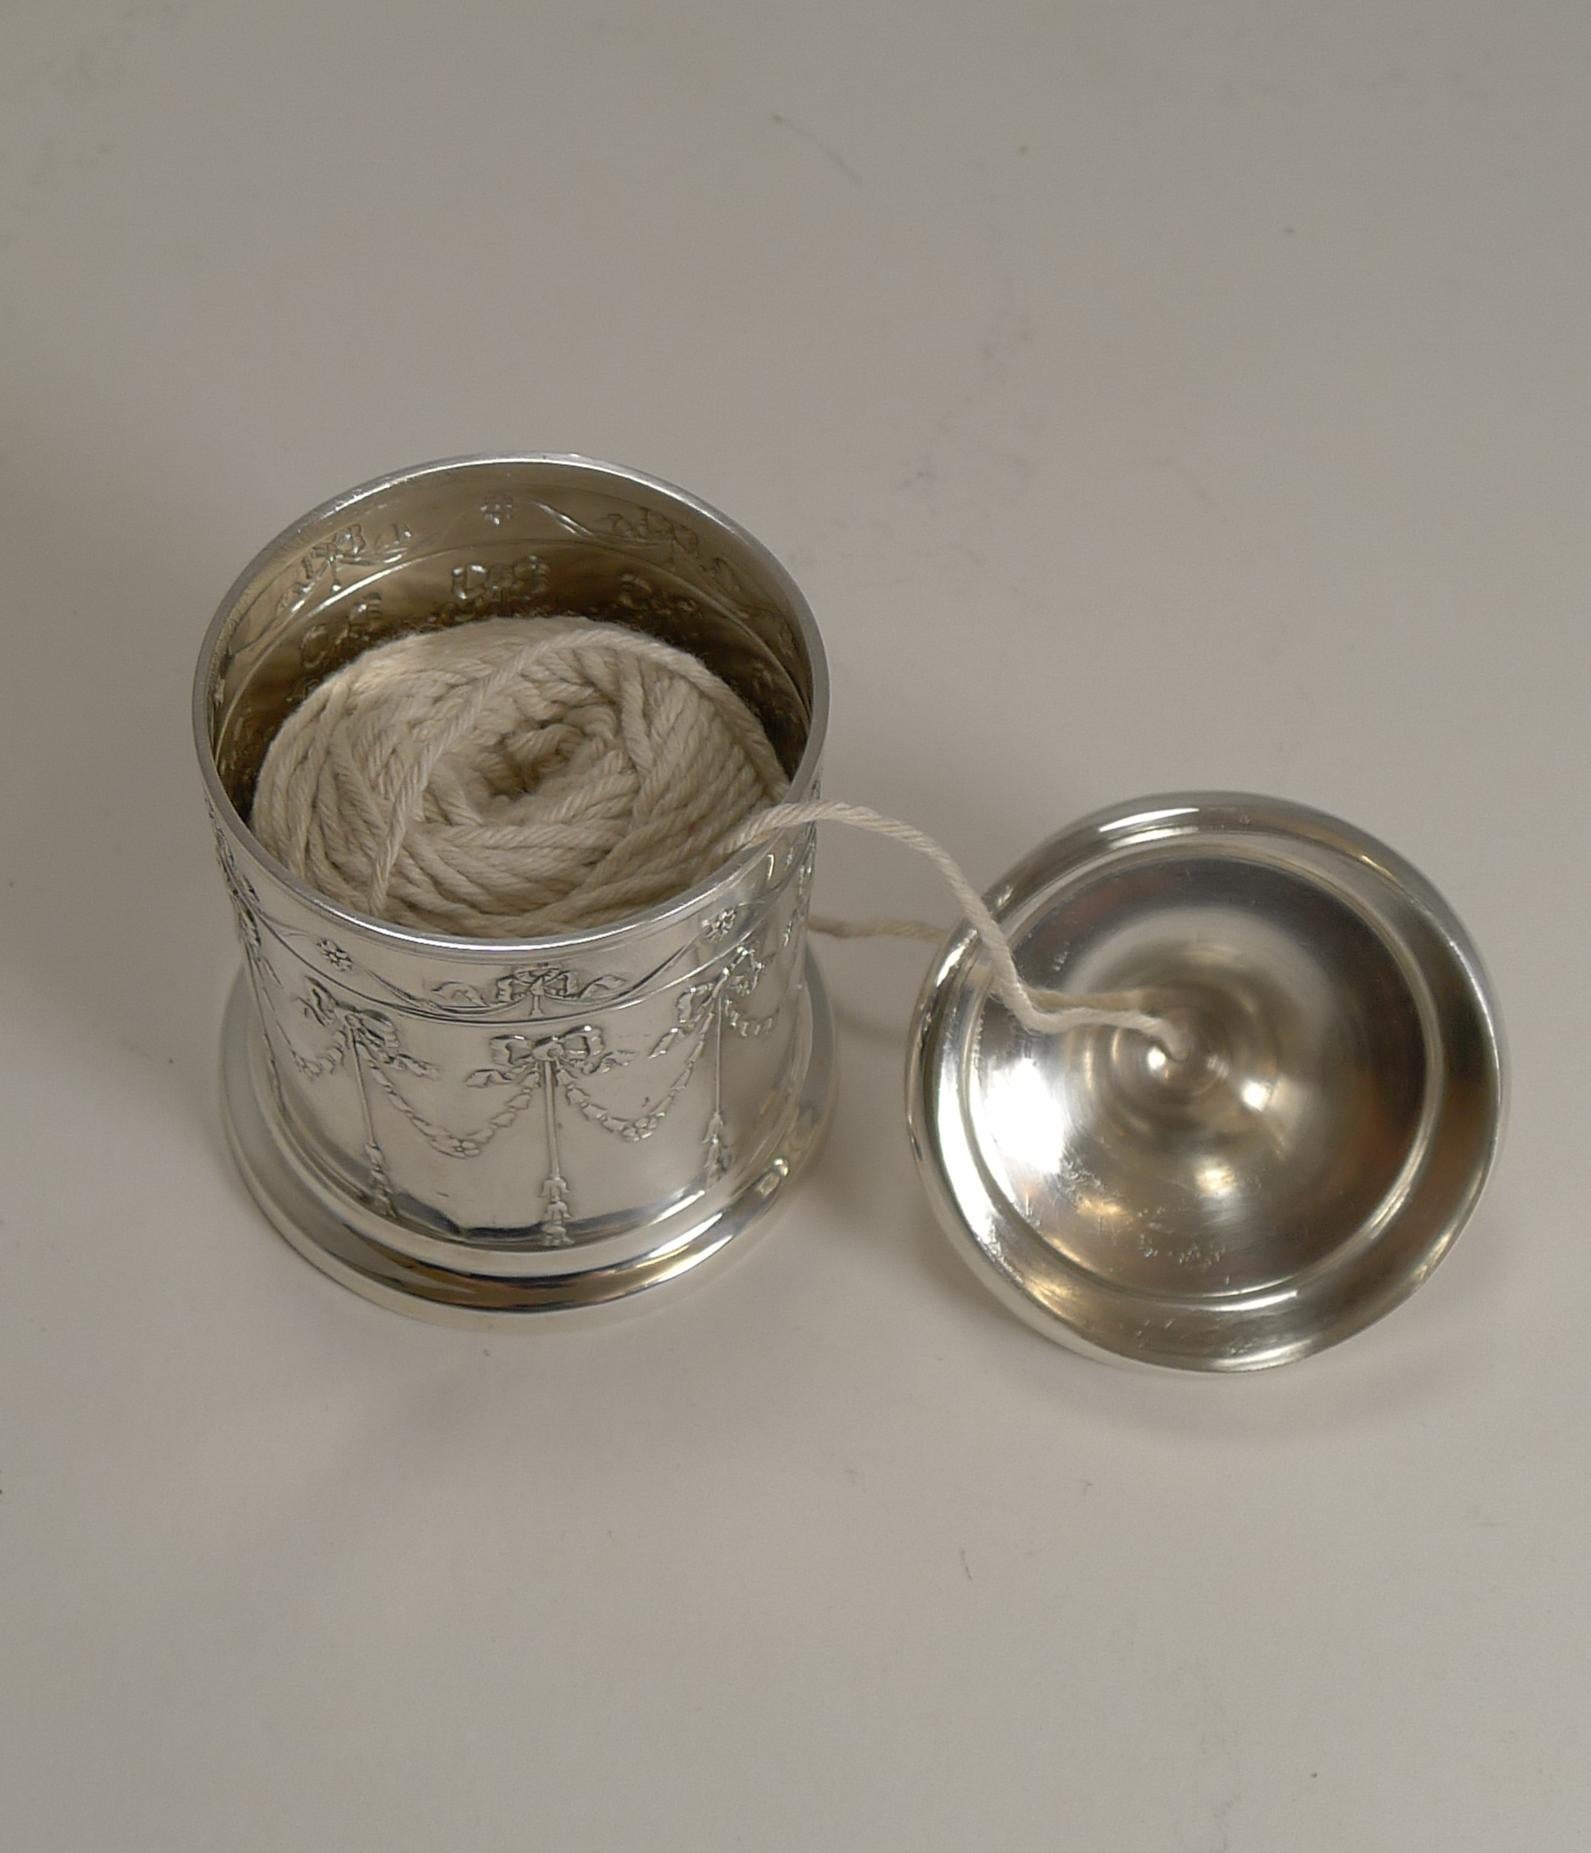 Early 20th Century Antique English Sterling Silver String or Twine Box, 1906